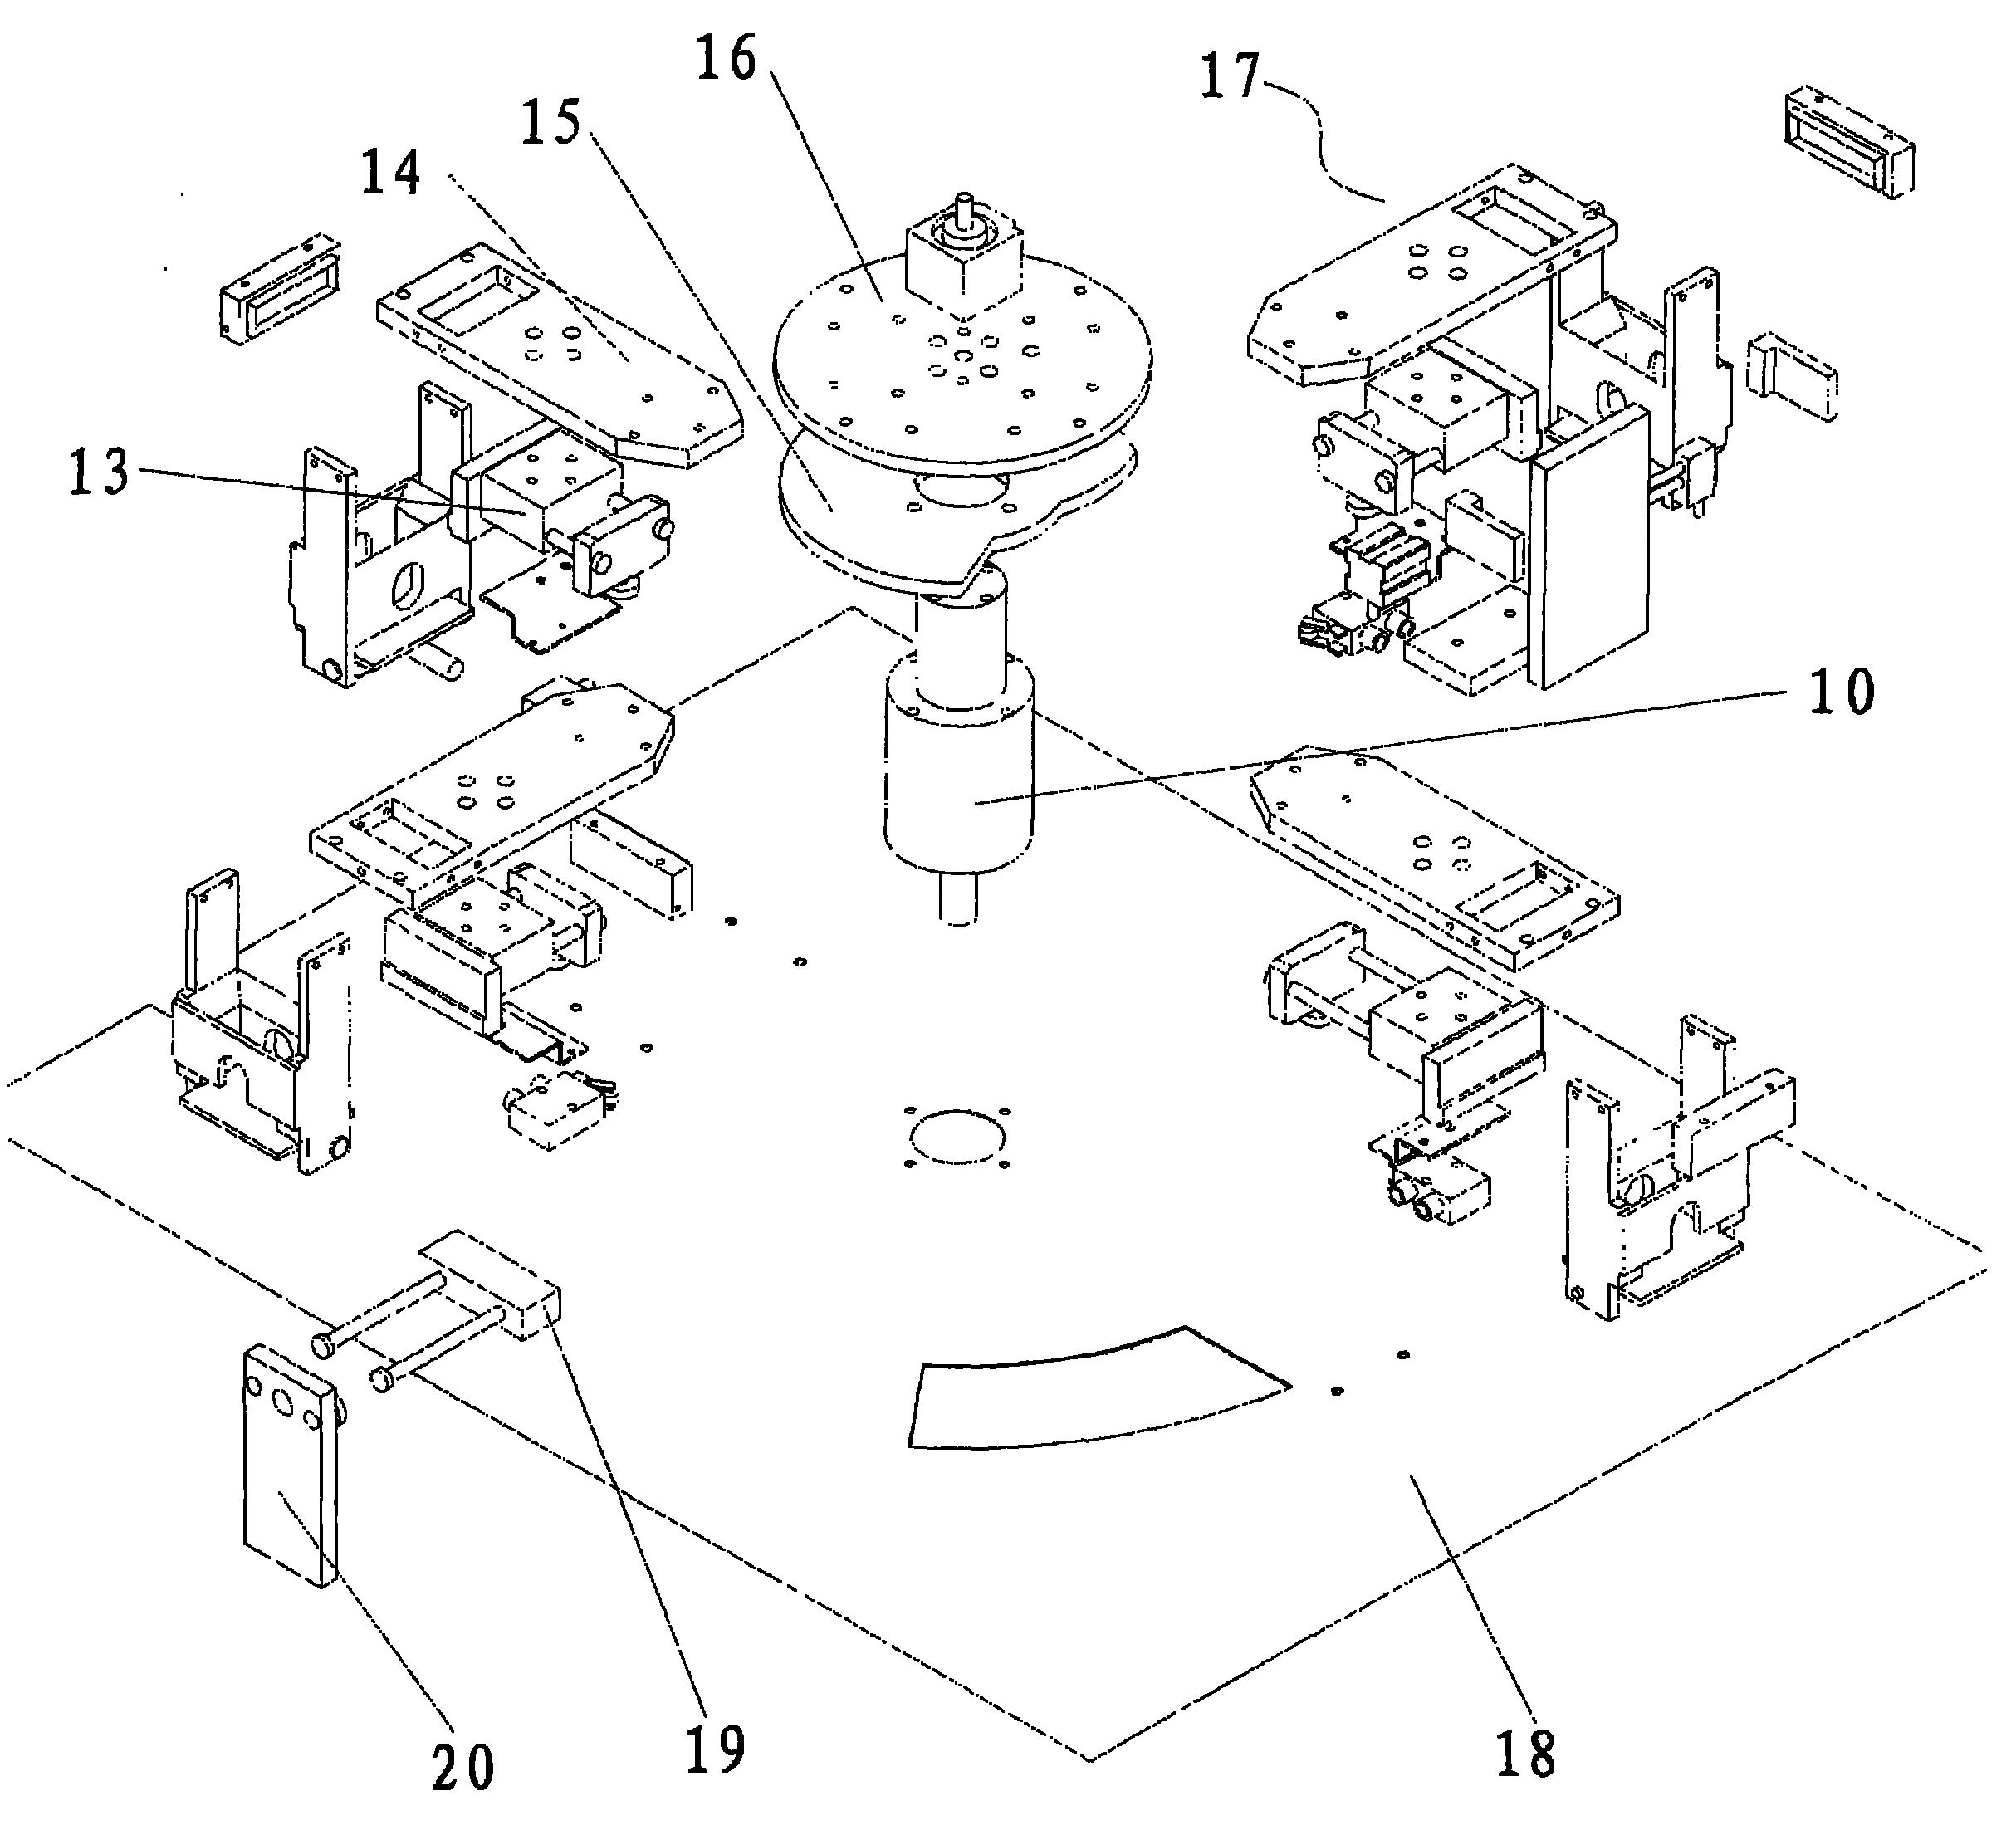 Automatic vacuum sub-packaging device for granular food products